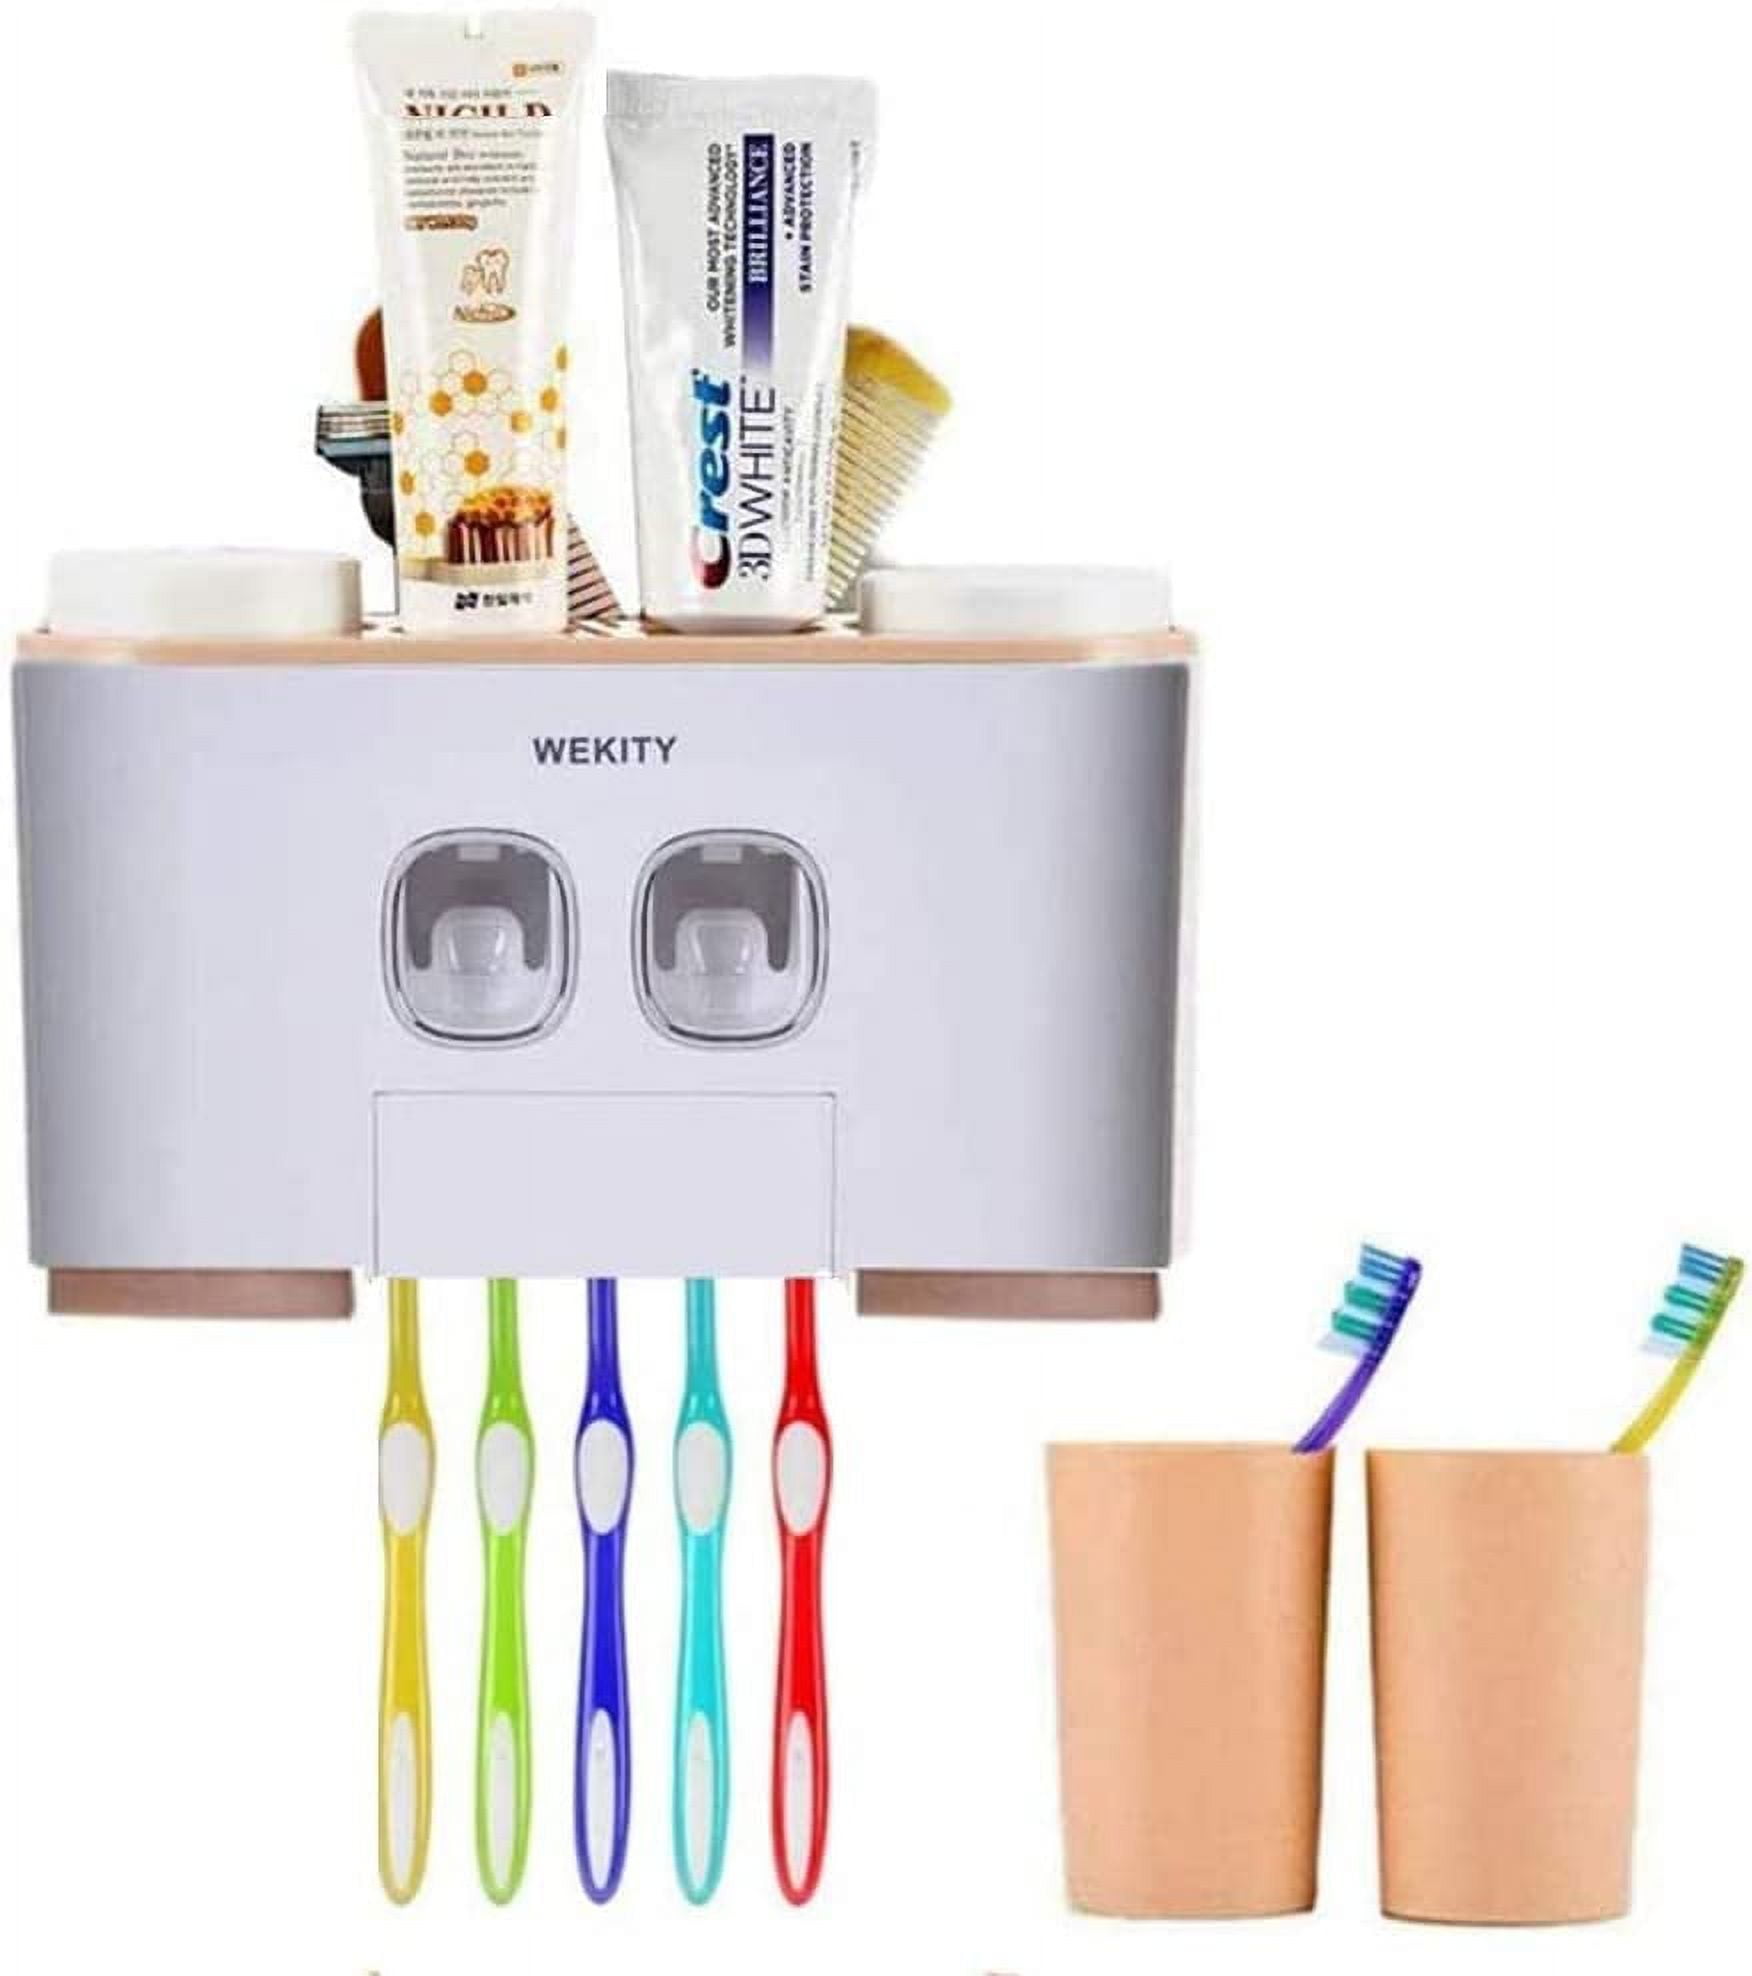  Toothbrush Holders for Bathrooms, 4 Cups Toothbrush Holder Wall  Mounted with Toothpaste Dispenser - Large Capacity Tray, Cosmetic Drawer -  Tooth Brushing Holder & Bathroom Accessories (4 Cup, White) : Home & Kitchen